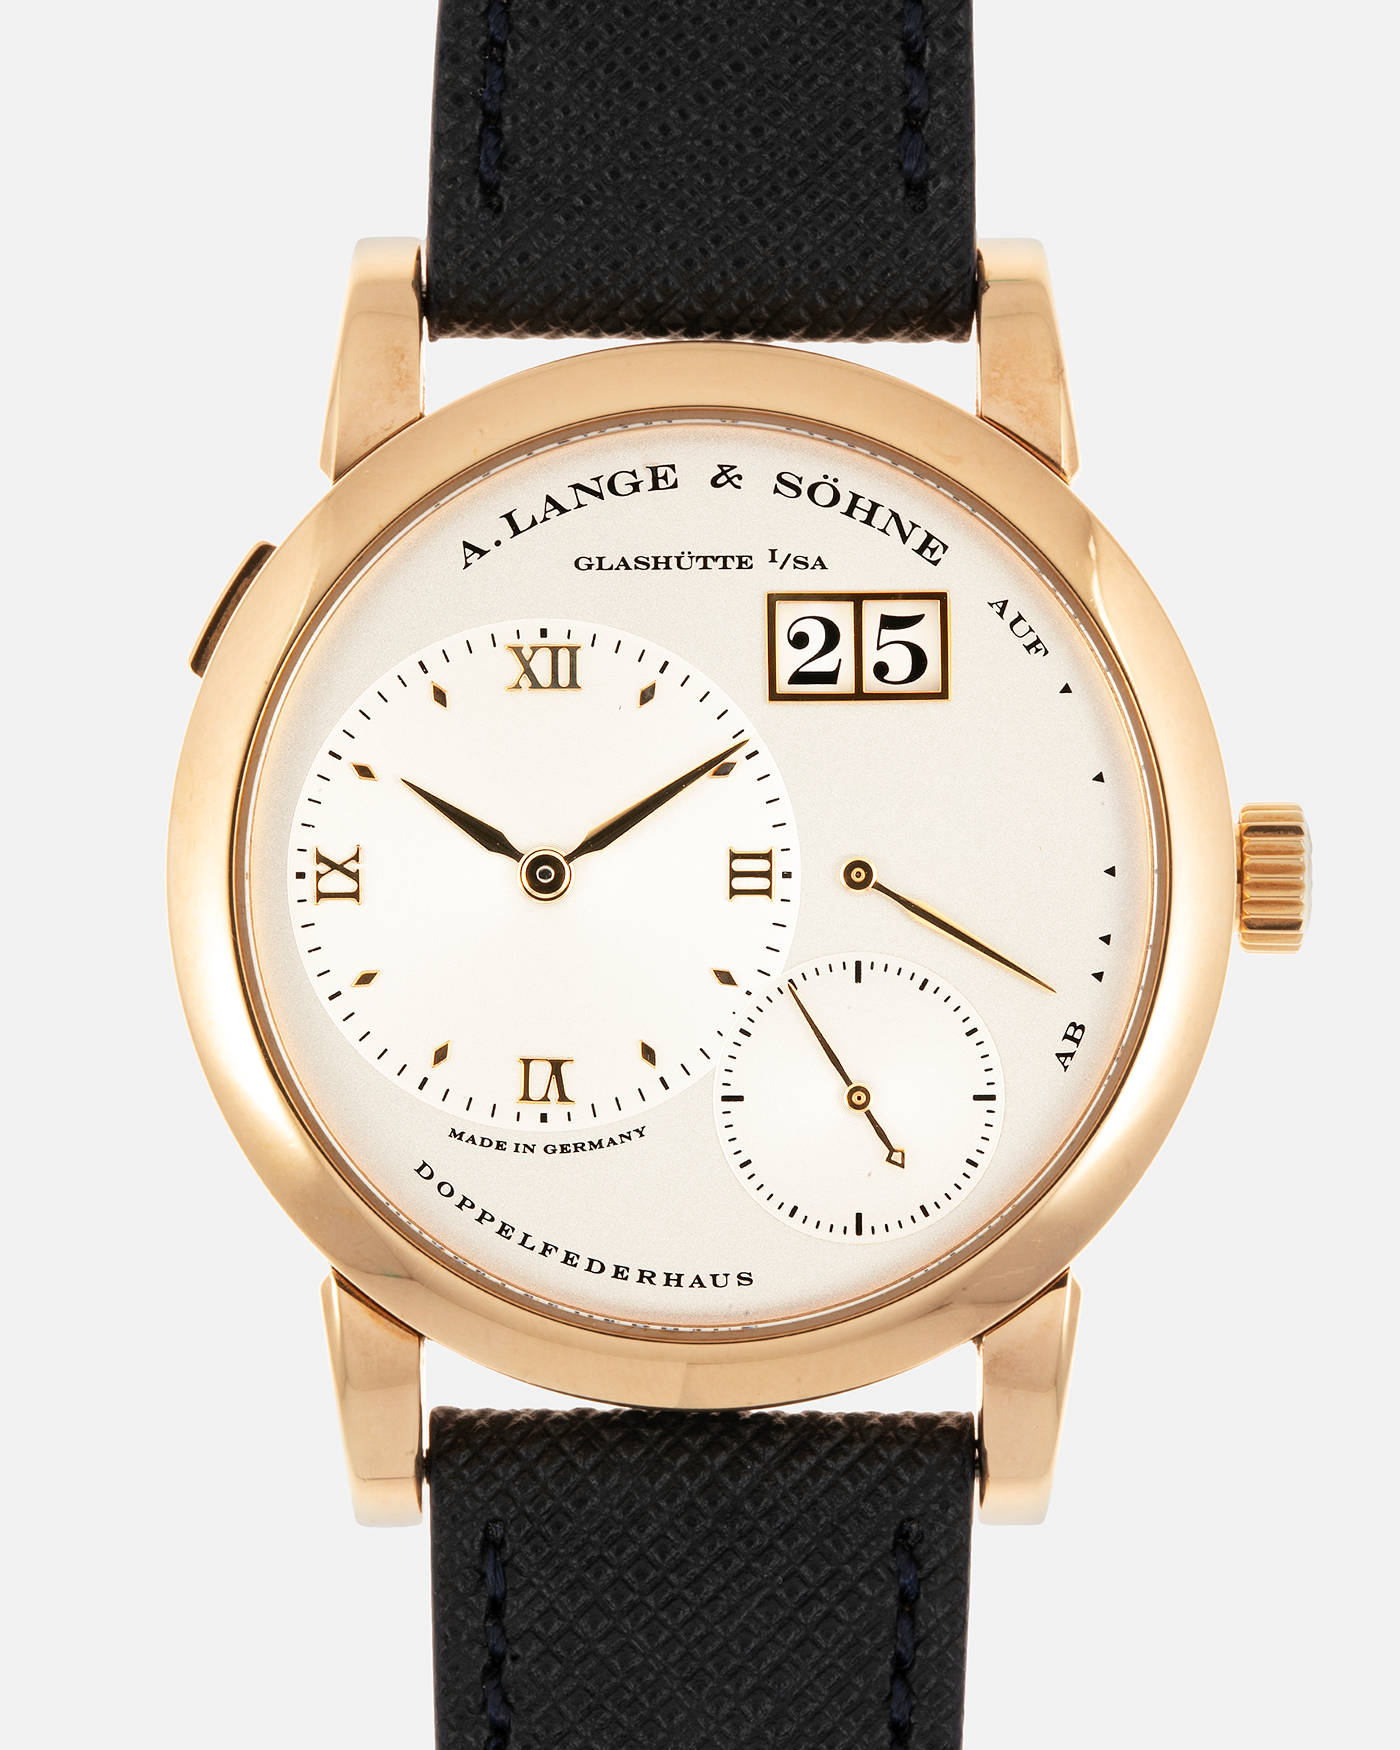 Brand: A. Lange & Sohne Year: 2000s Model: Lange 1 Reference: 101.032 Material: 18-carat Rose Gold, German Silver Movement: A. Lange & Söhne Cal. L901.0, Manual-Winding Case Diameter: 38.5mm Lug Width: 20mm Strap: Molequin Navy Blue Textured Calf Leather Strap with Signed 18-carat Rose Gold Tang Buckle, with additional A. Lange & Söhne Black Alligator Leather Strap (Used)